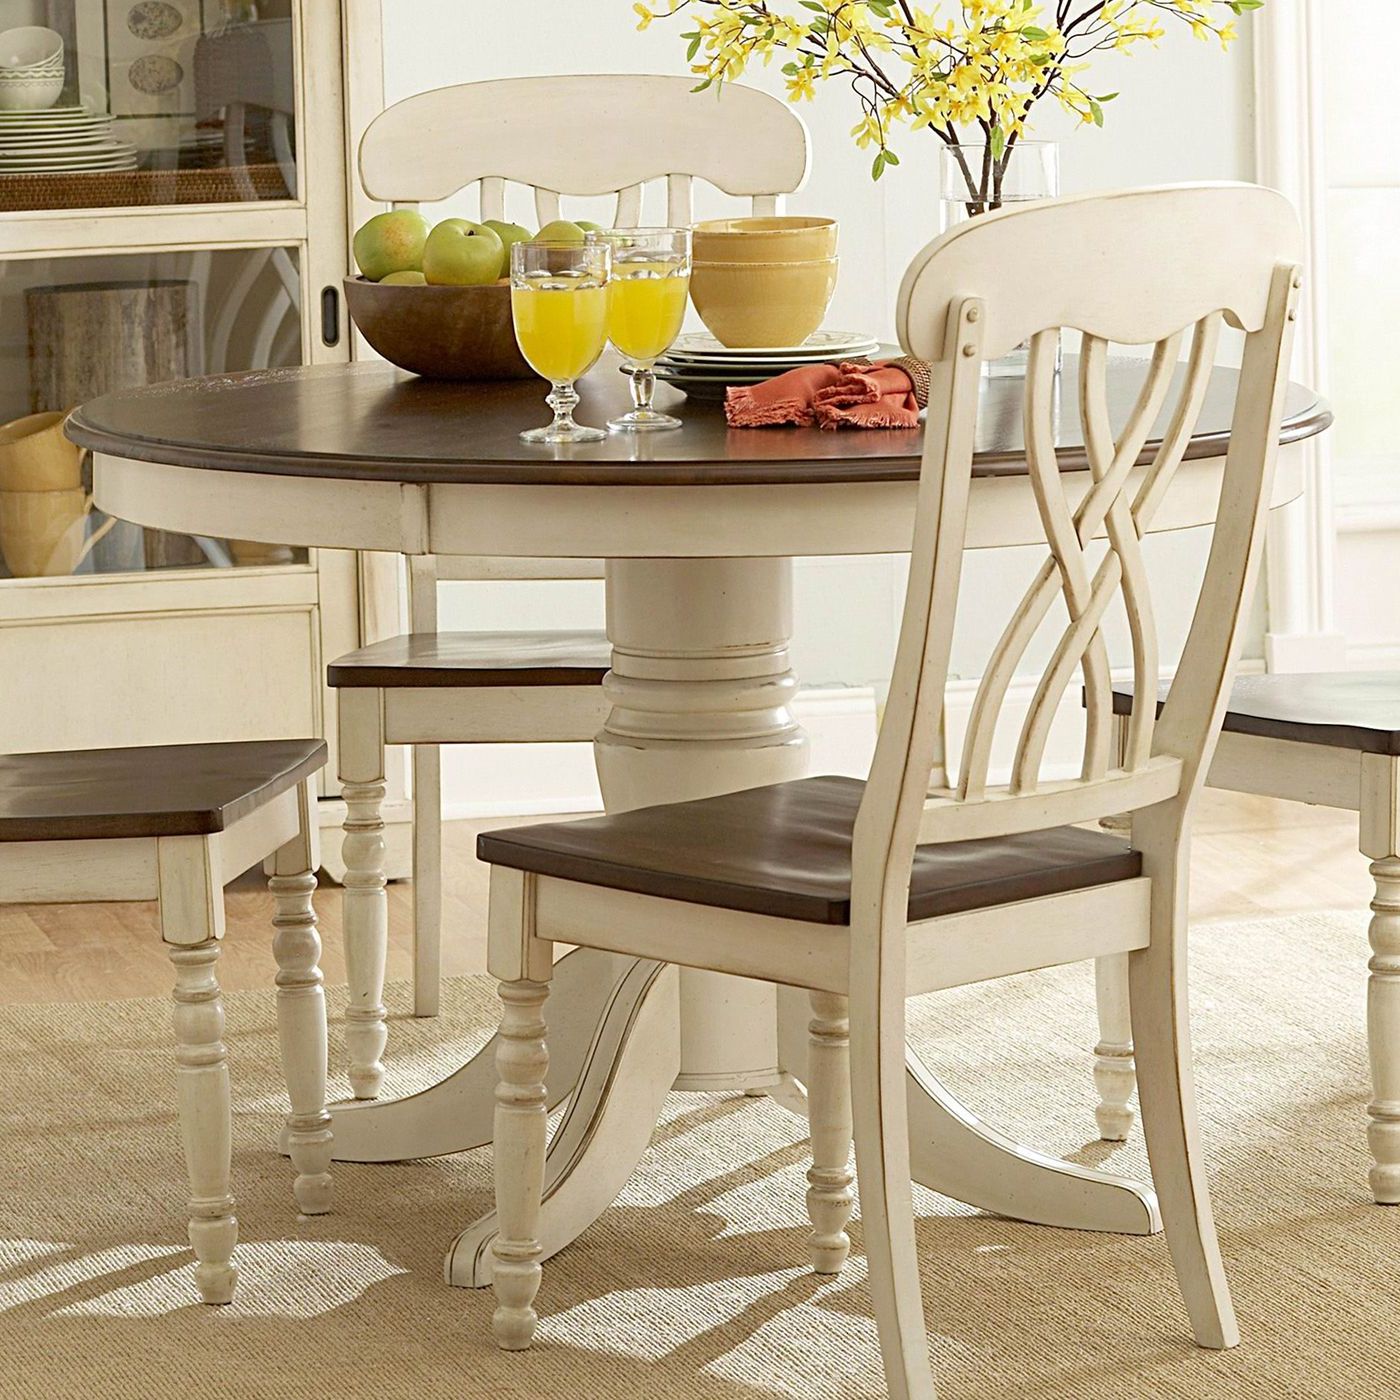 Most Recent Breakfast Table. Inspiration Piece. The Cream Color And With Regard To Solid Wood Circular Dining Tables White (Photo 20 of 25)